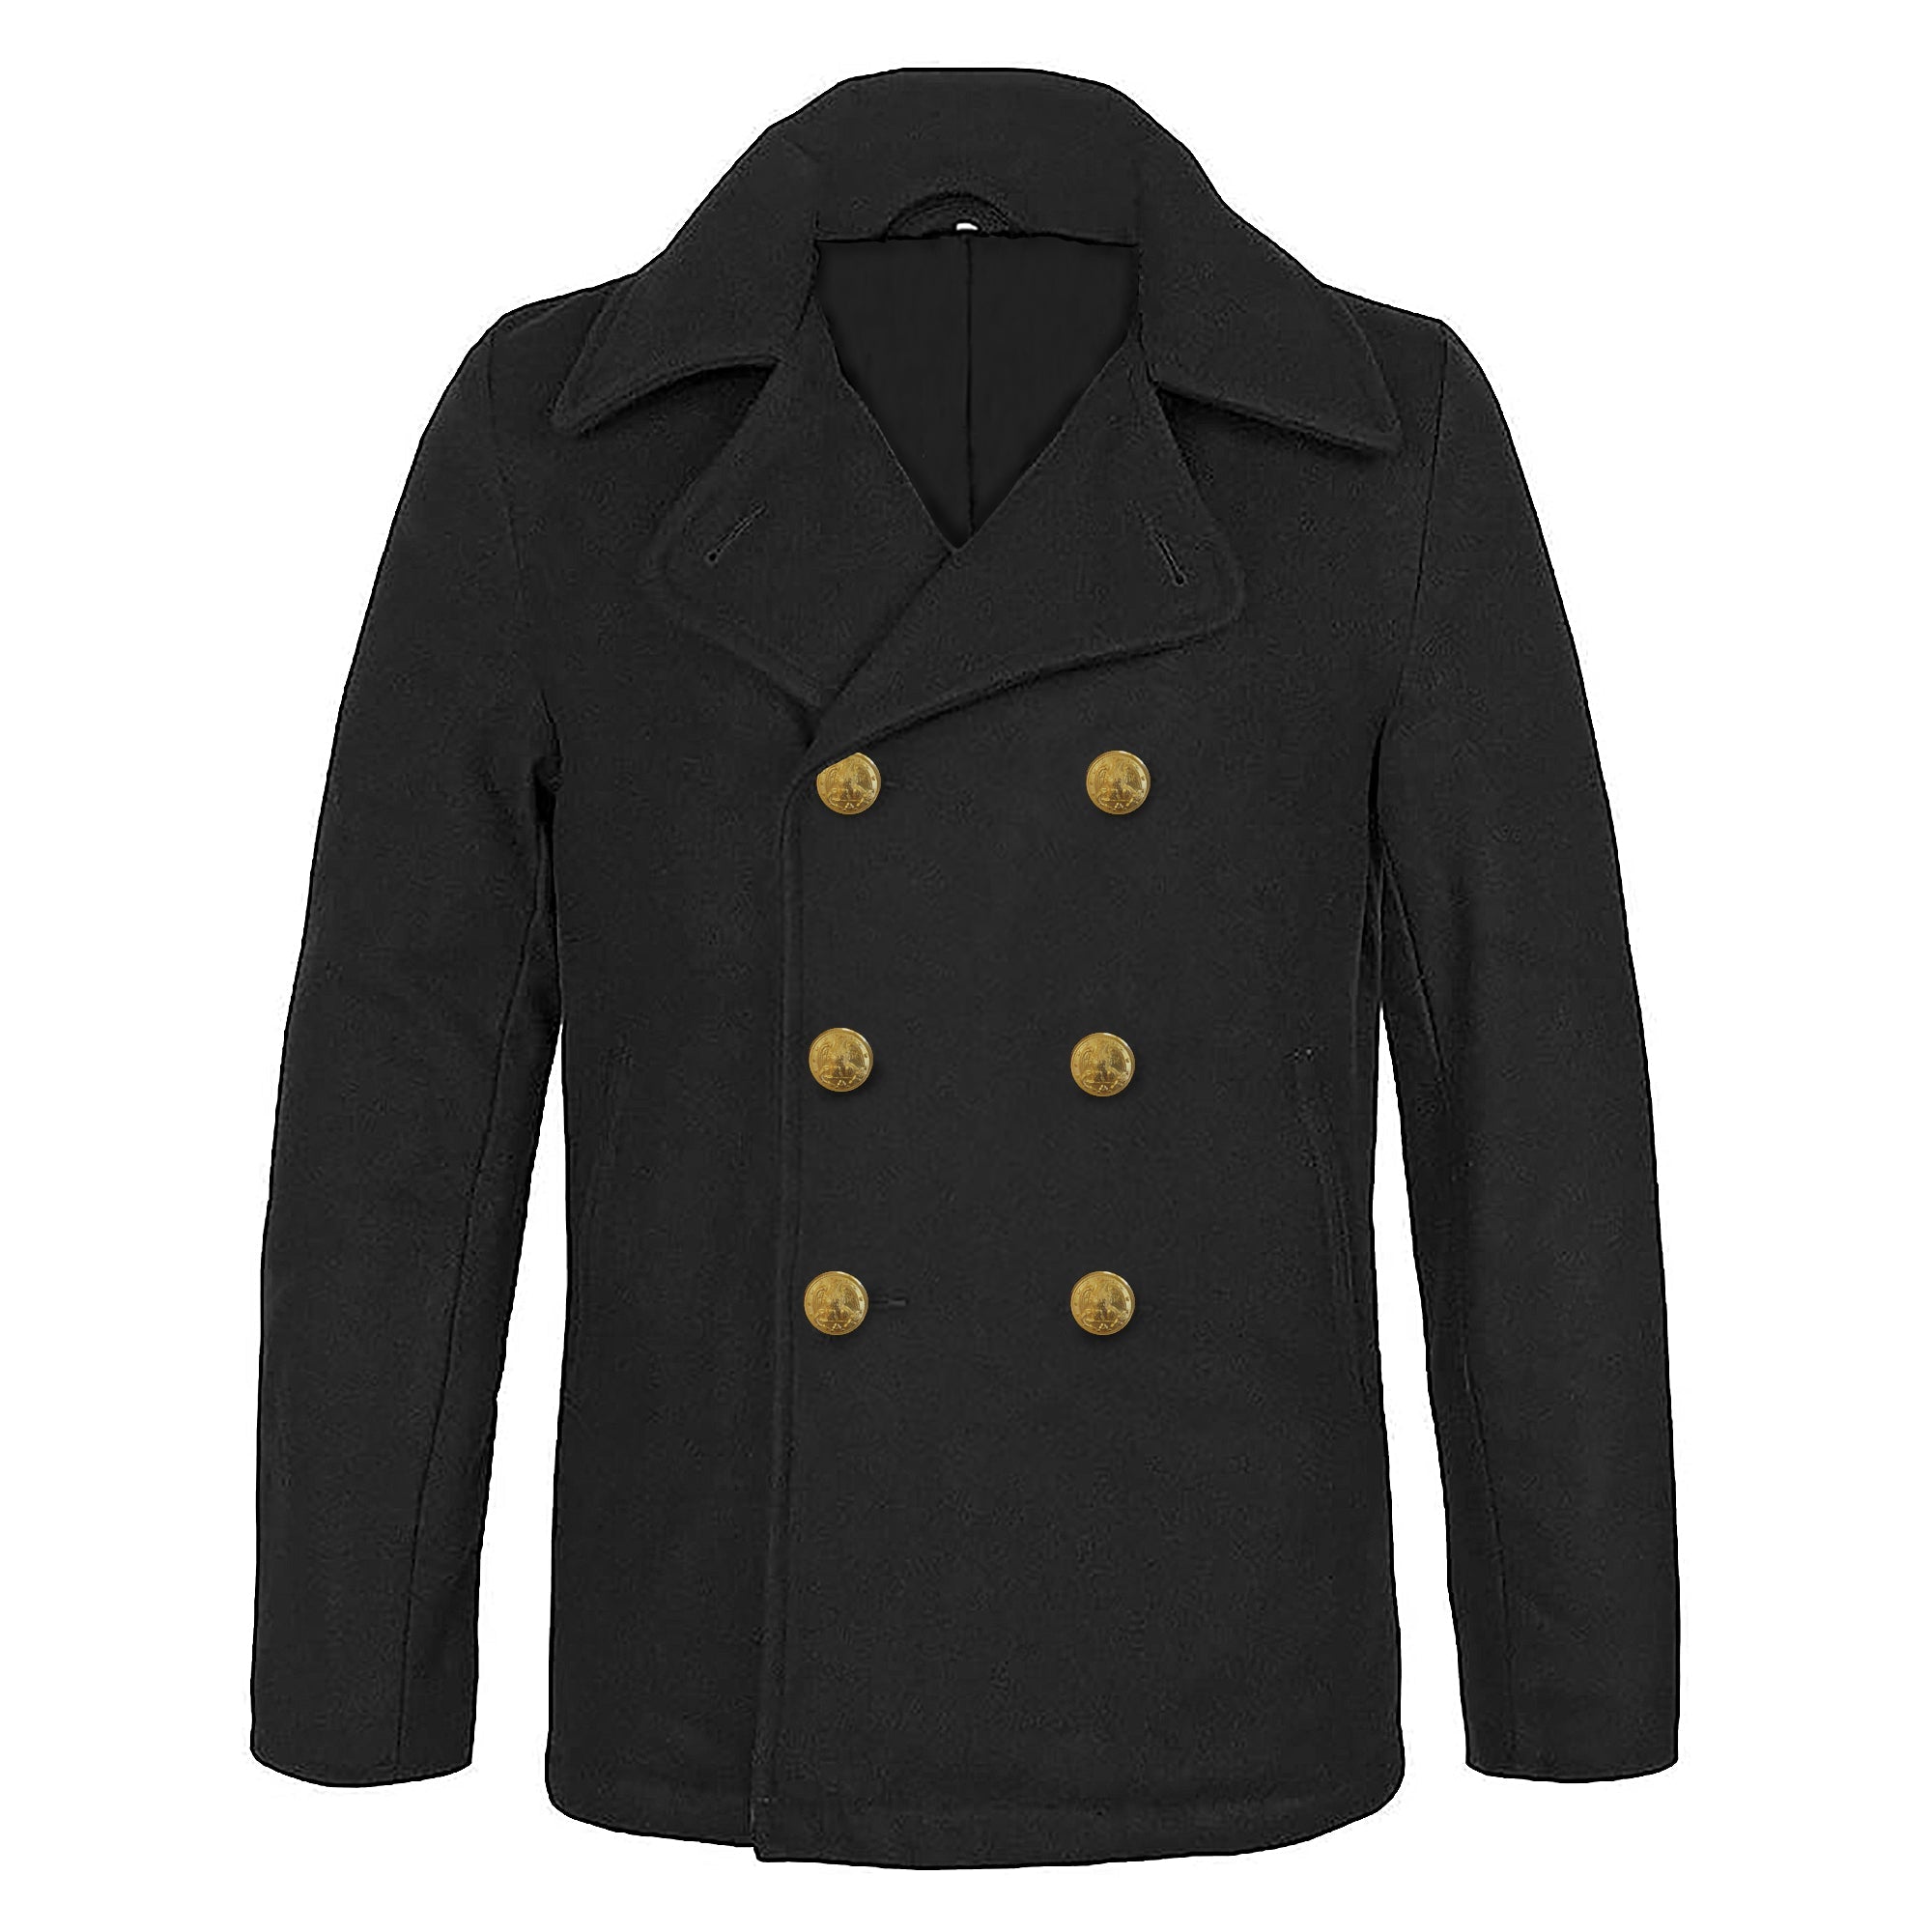 AS-IS NAVY Men Officer Reefer Peacoat Military Outerwear Wool